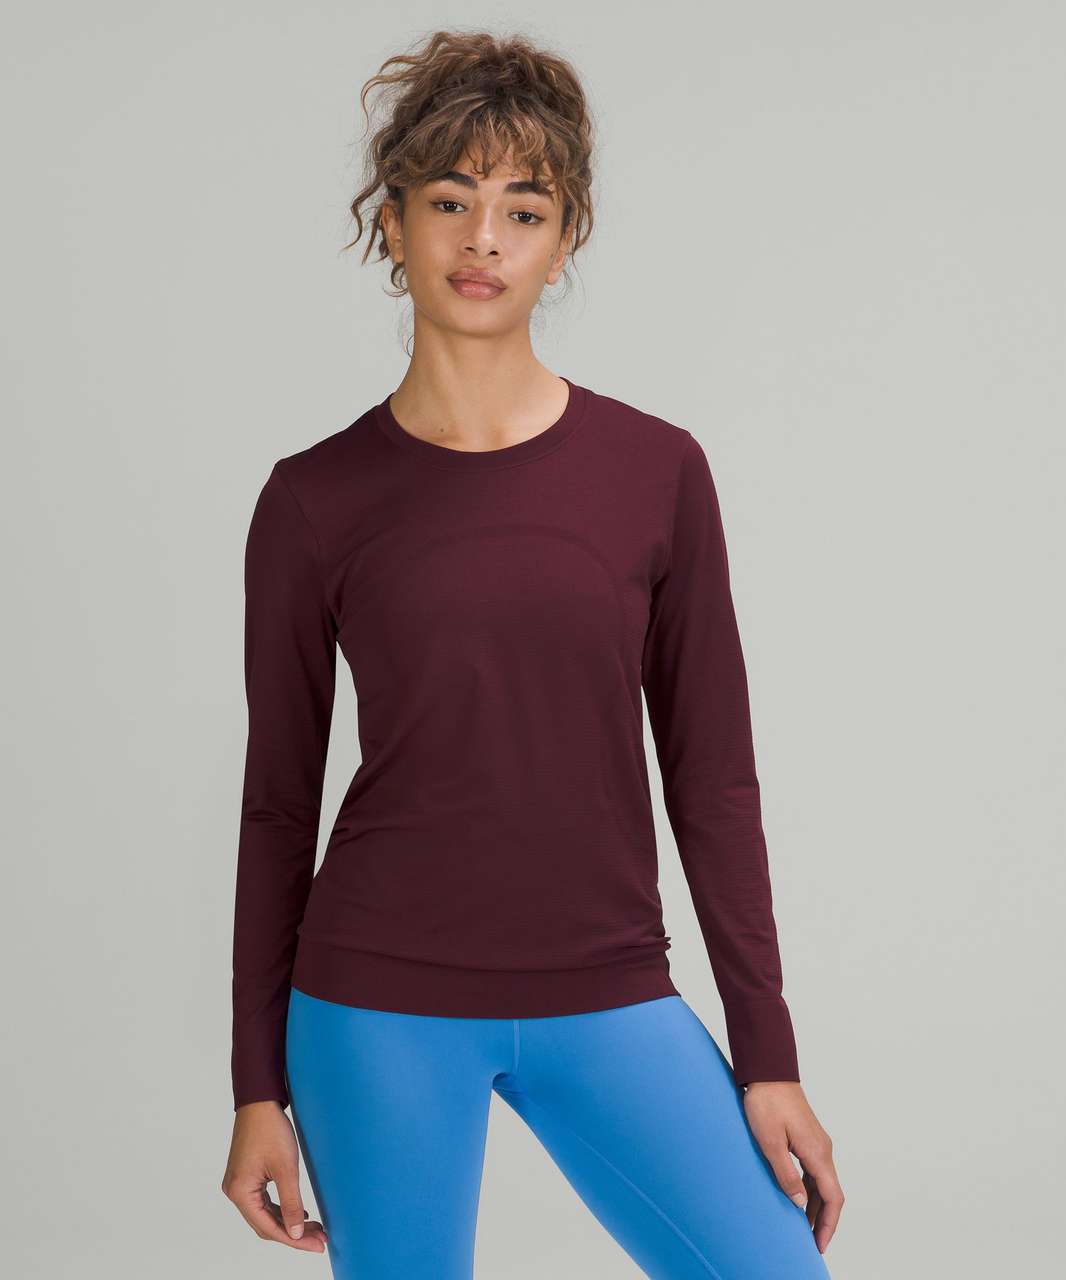 Lululemon Swiftly Relaxed Long Sleeve Shirt - Cassis / Cassis